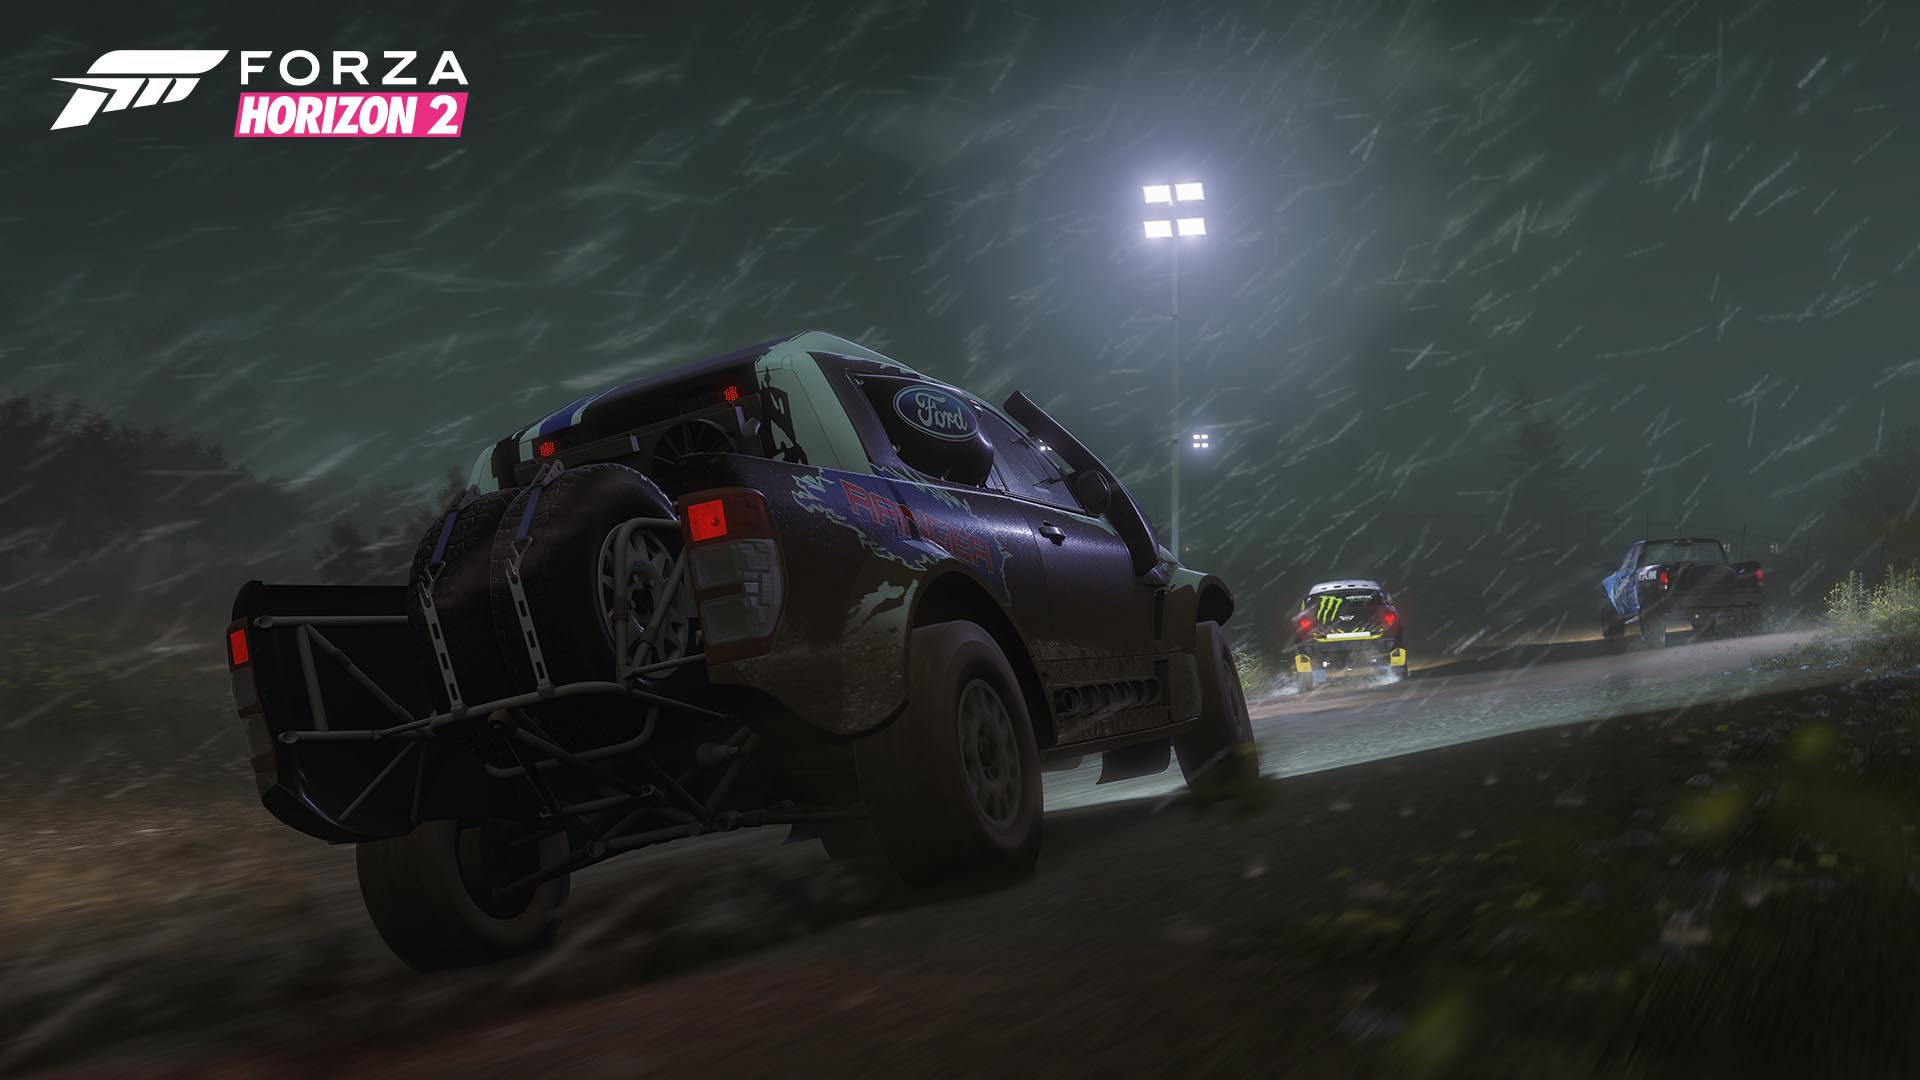 It’s no secret that we love <i>Forza Horizon 2</i>. What’s not to love about bombing around the sun-drenched European countryside in a supercar (or Transit van)? Need something more refreshing? The Storm Island DLC adds a new location with a focus on off-road racing and adverse weather (think fog and torrential downpours). | <b>For:</b> Xbox One, Xbox 360 (core game only)